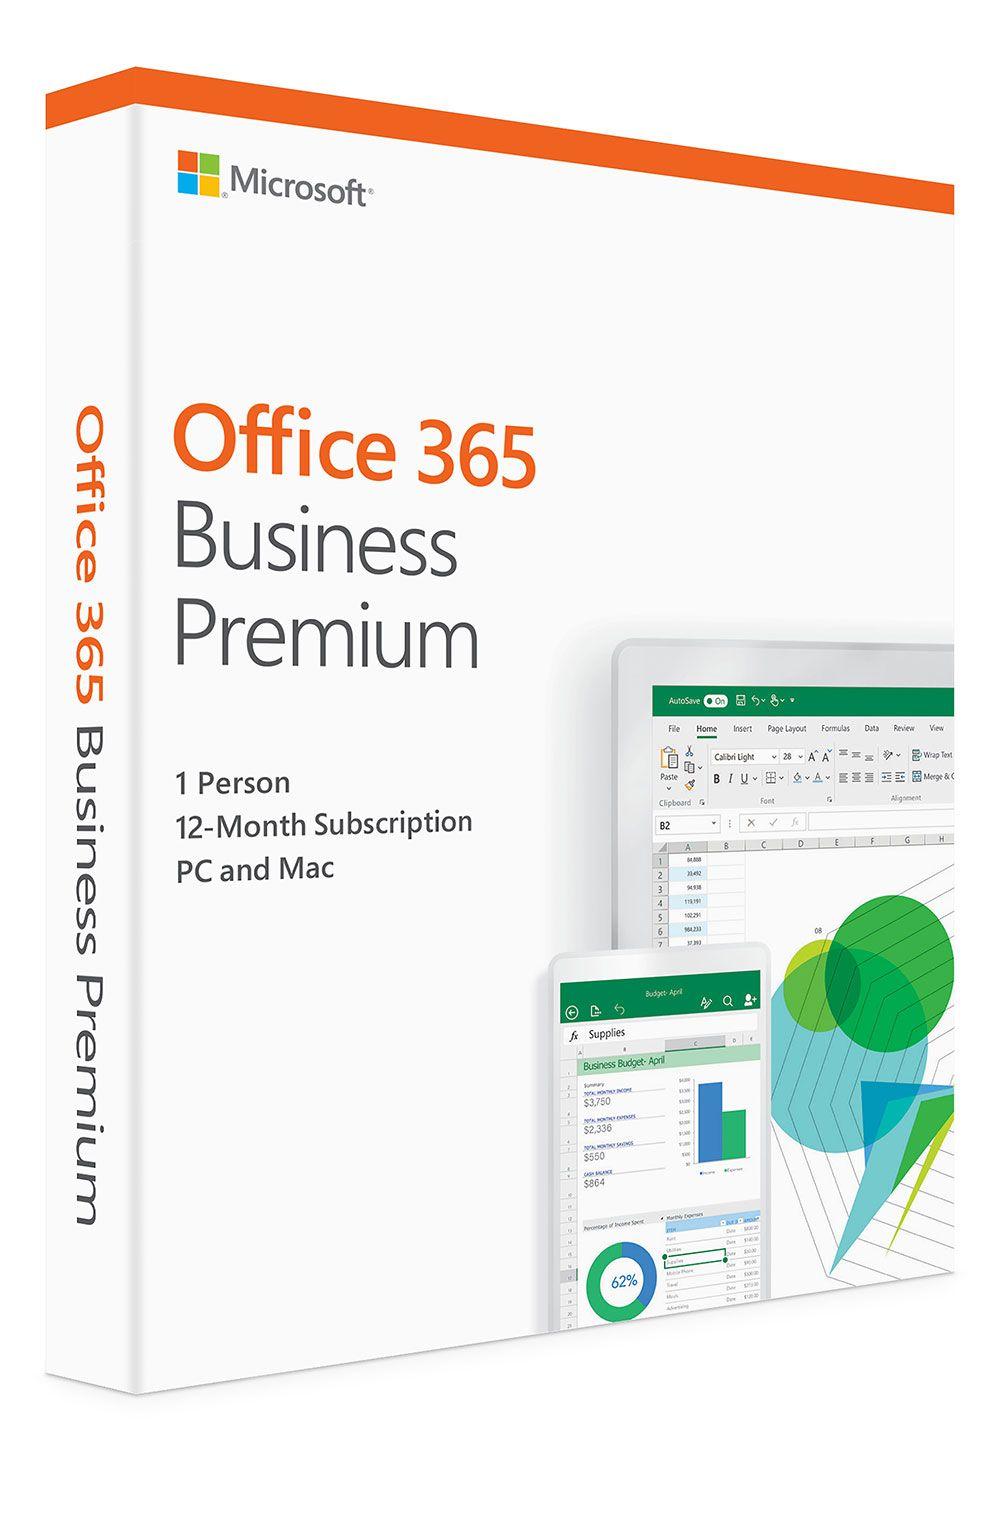 Microsoft Office 365 Business Logo - Microsoft Office 365 Business Premium 2019 - Best Deal - South Africa